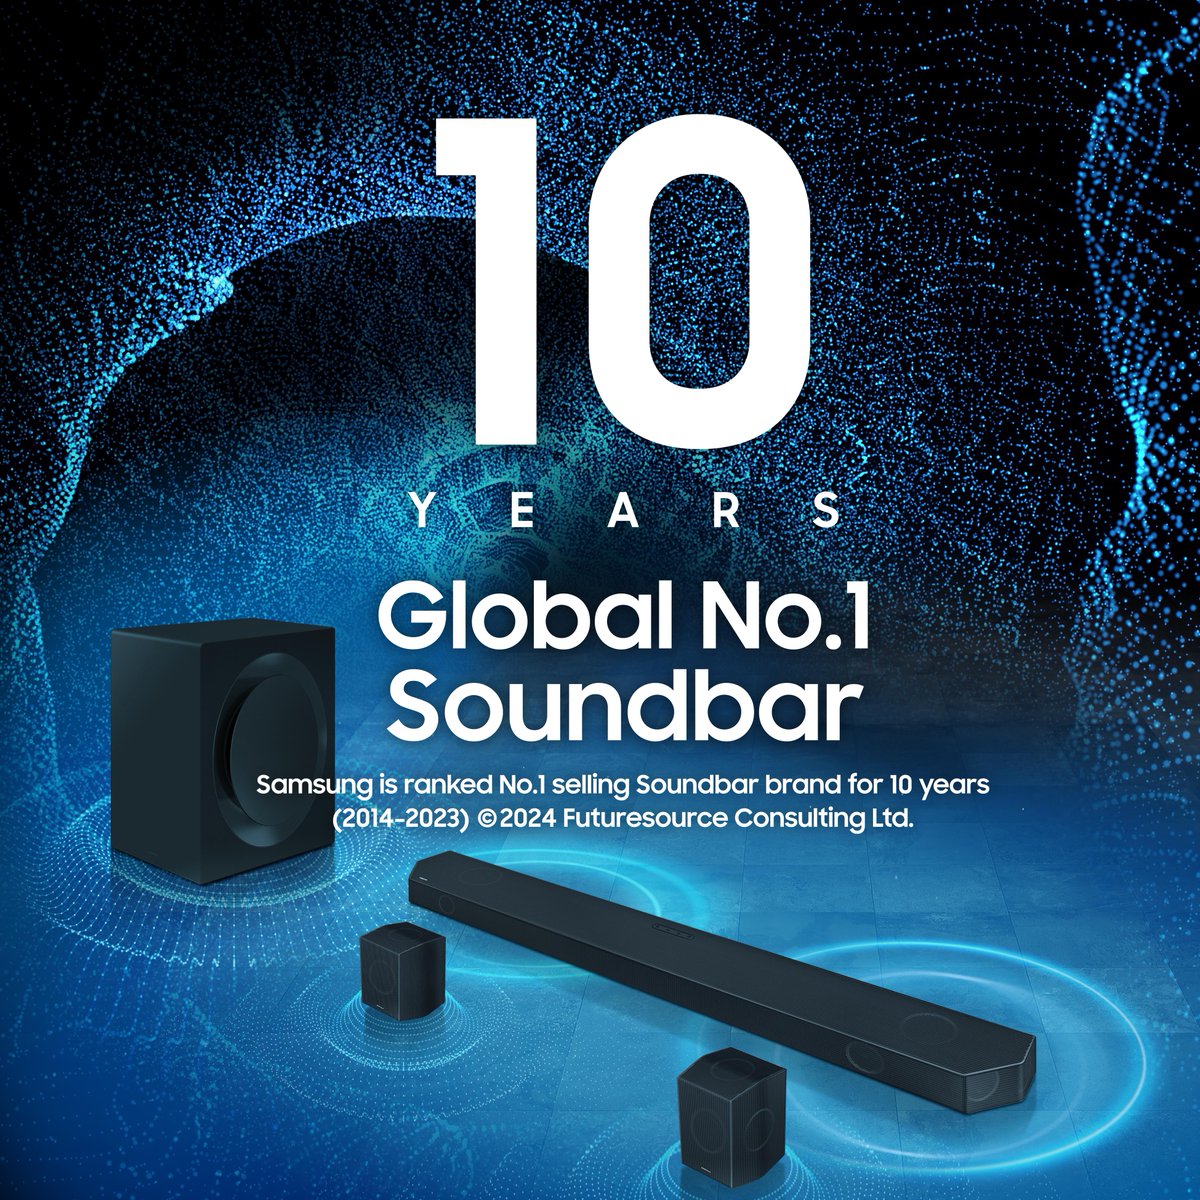 Celebrating 10 consecutive years of being the Global No. 1 selling soundbar brand ranked by Futuresource Consulting Ltd., Find out more at smsng.co/audio #SoundBar #NeoQLED #SoundsWowTogether #Samsung